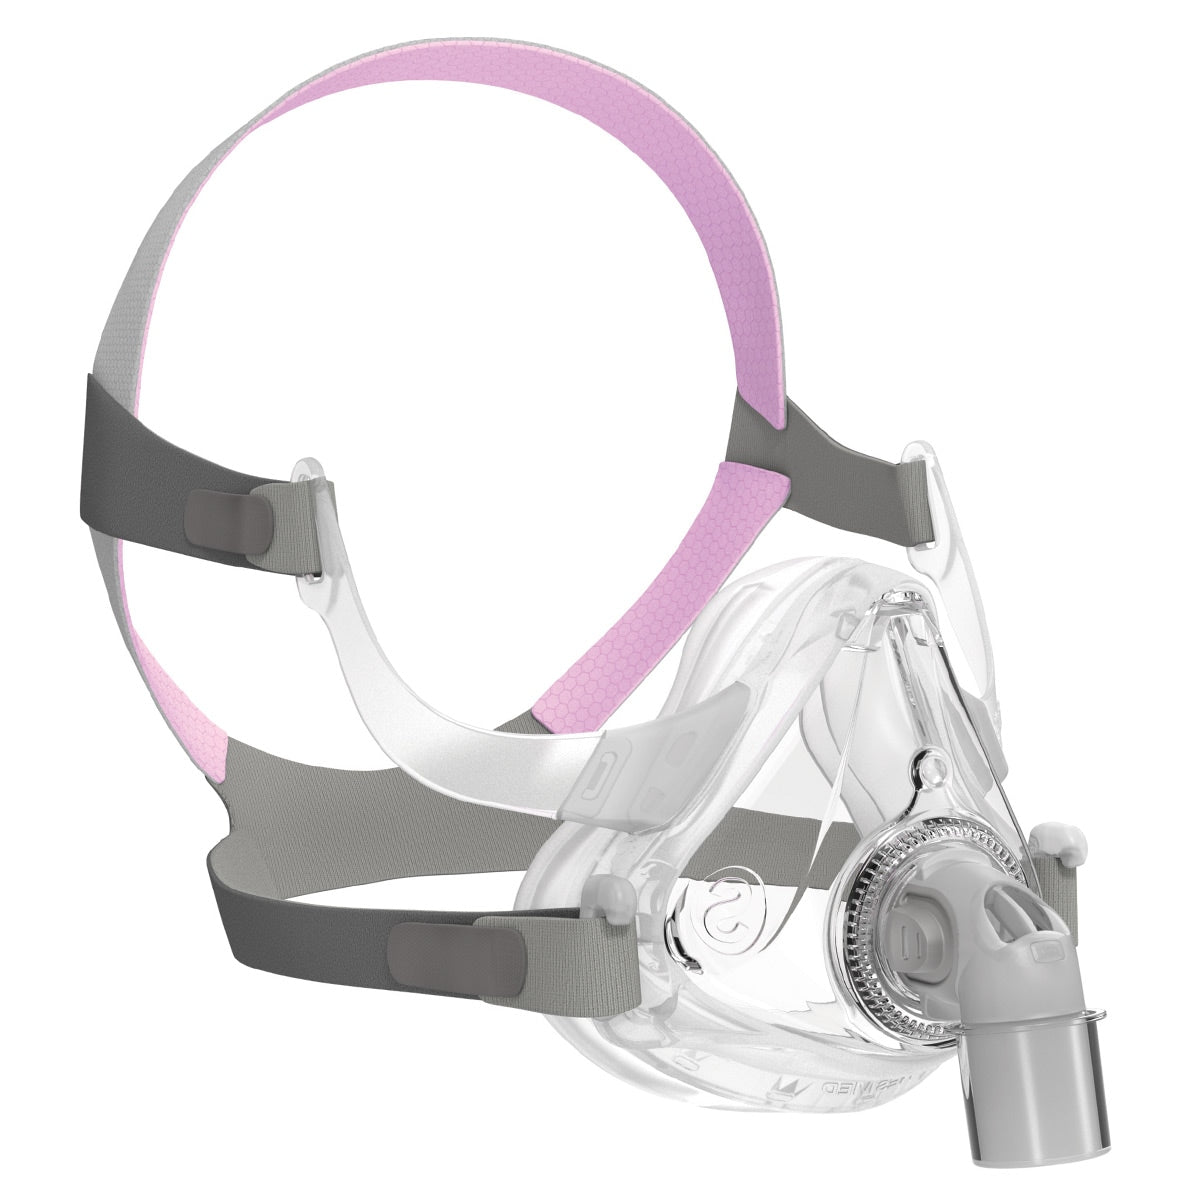 AirFit F10 for Her Full Face CPAP/BiLevel Mask with Headgear